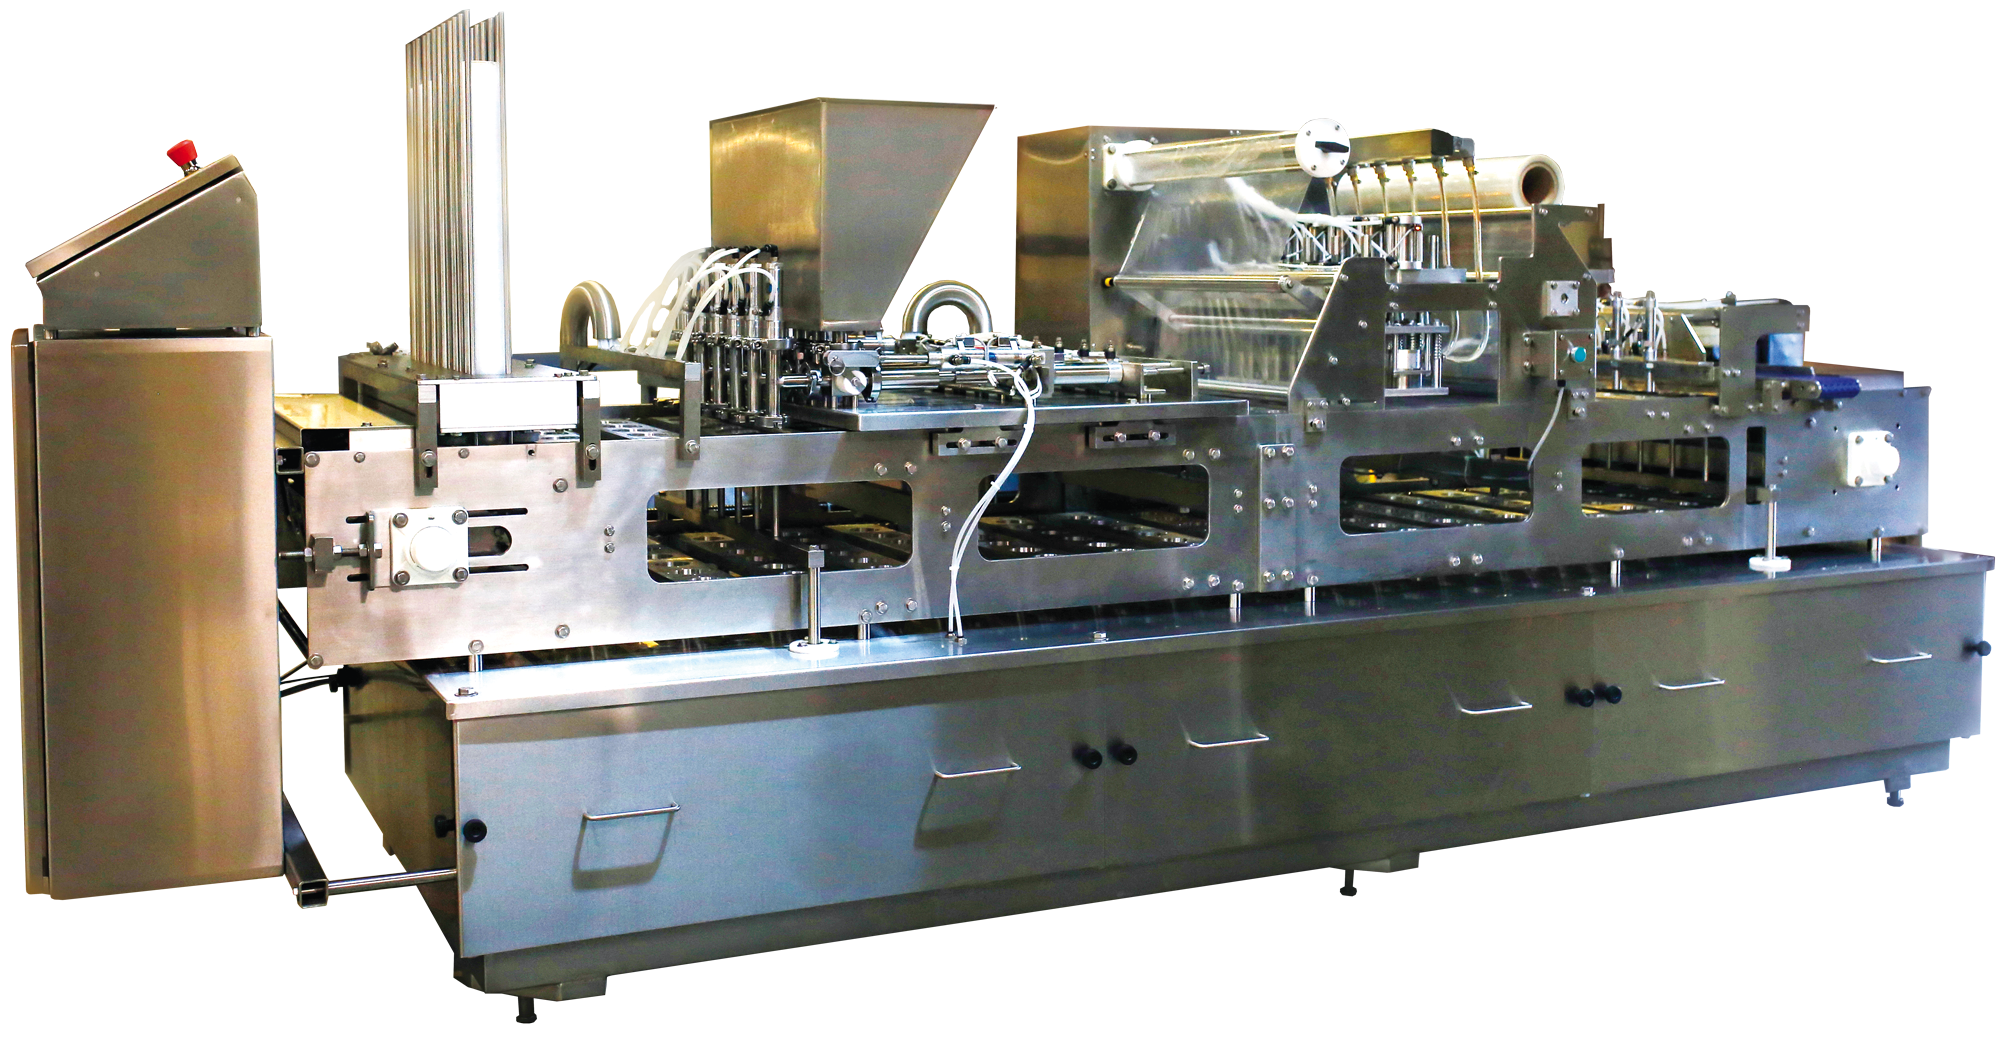 Photo of 6 lane in-line packaging machine made by Rocket Machine Works.